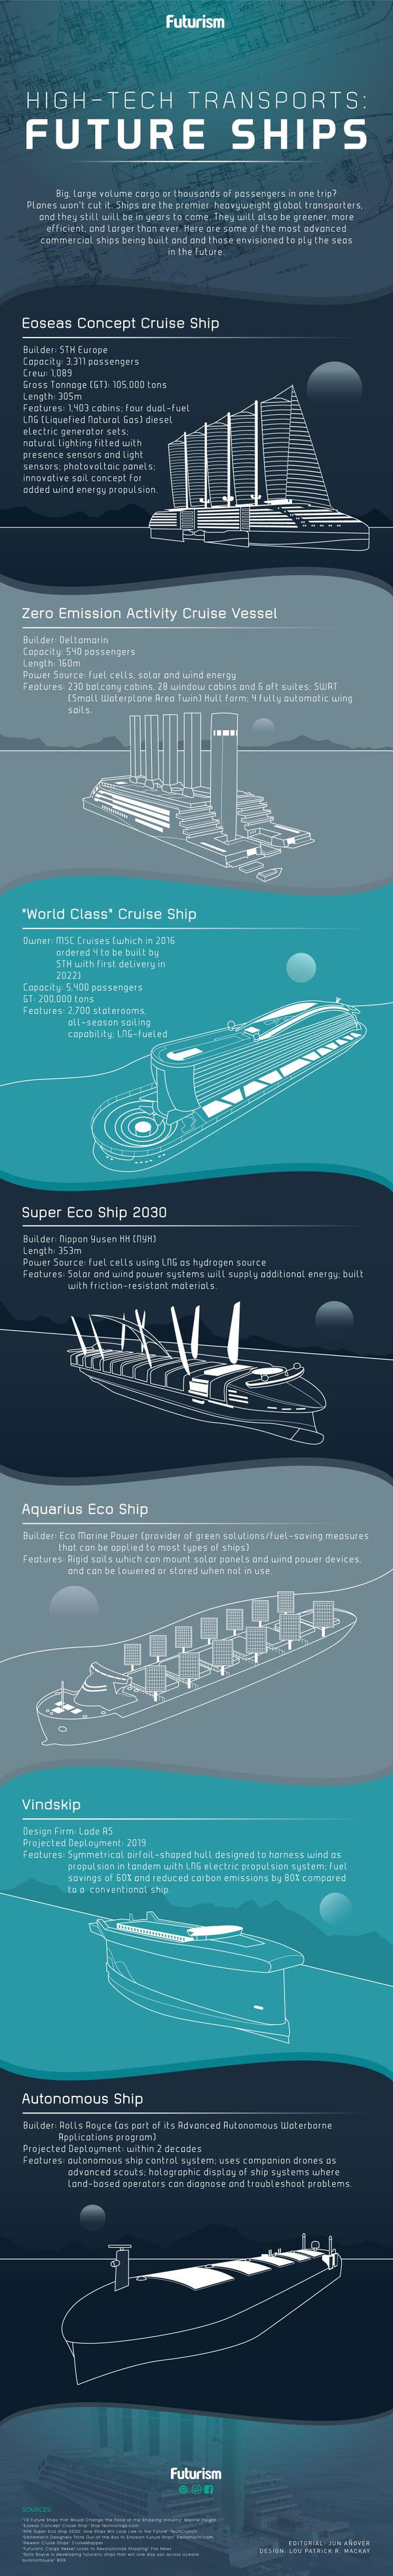 How ship tech is becoming more sustainable 